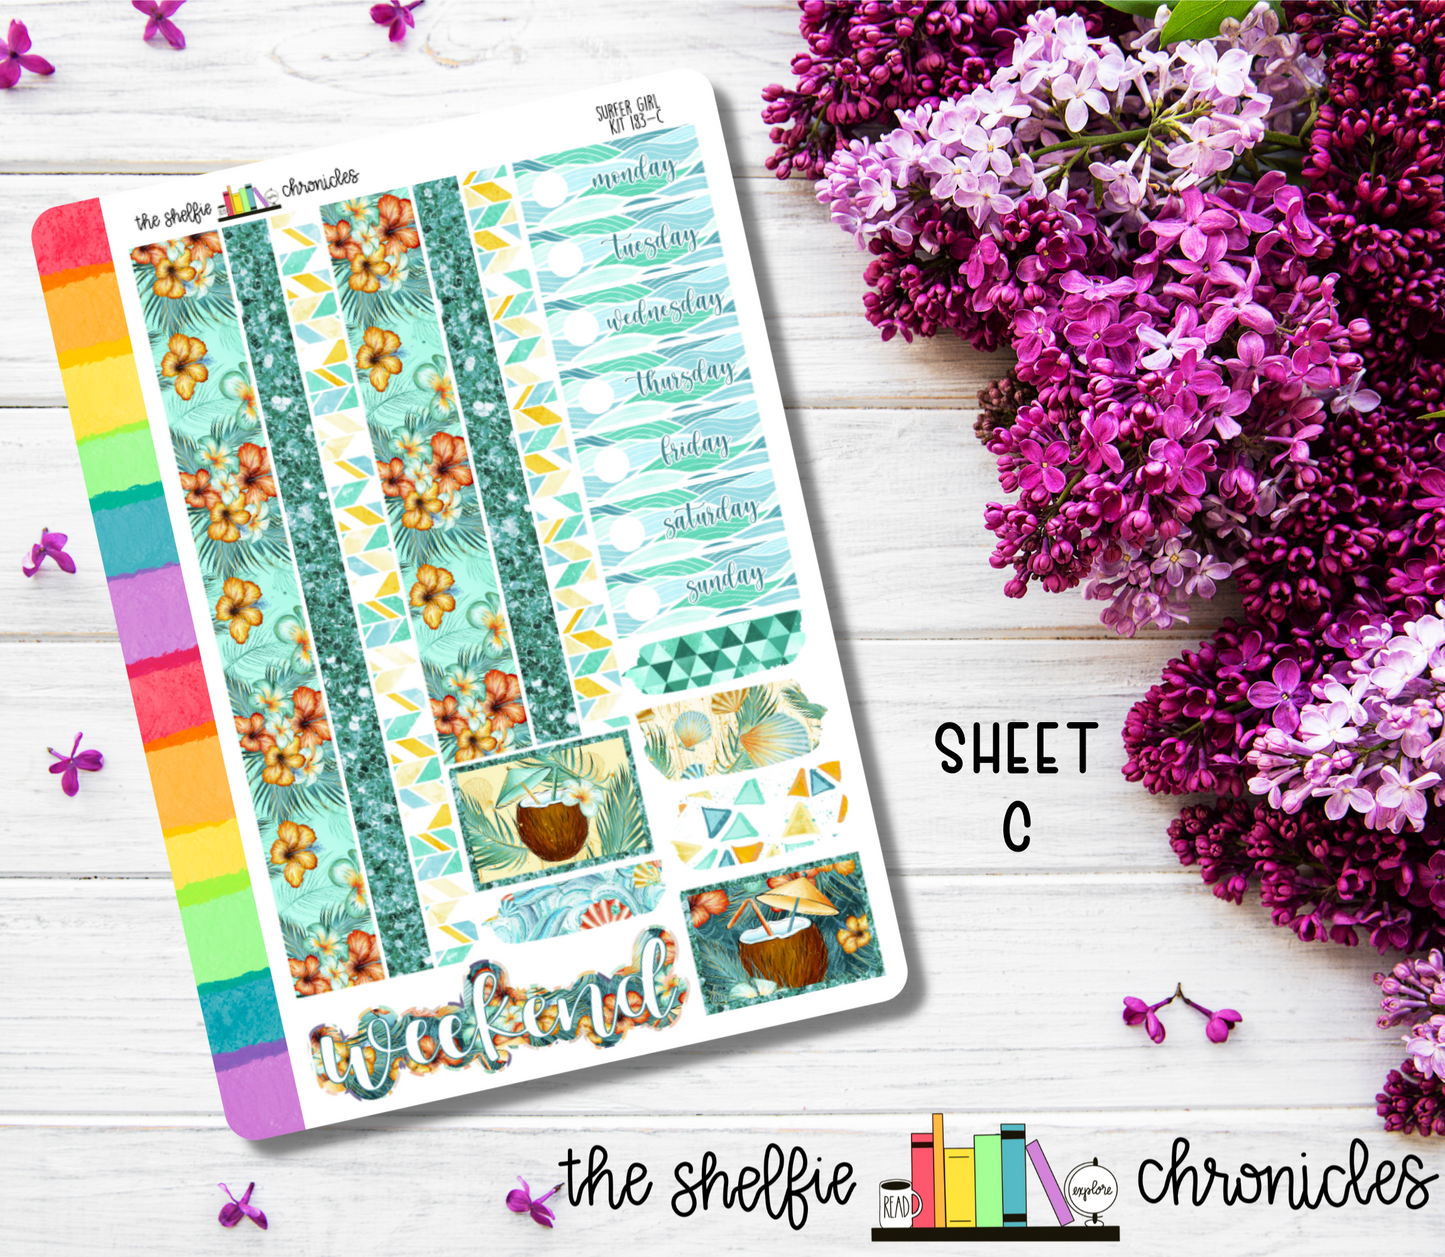 Kit 183 - Surfer Girl Weekly Kit - Die Cut Stickers - Repositionable Paper - Made To Fit 7x9 Planners